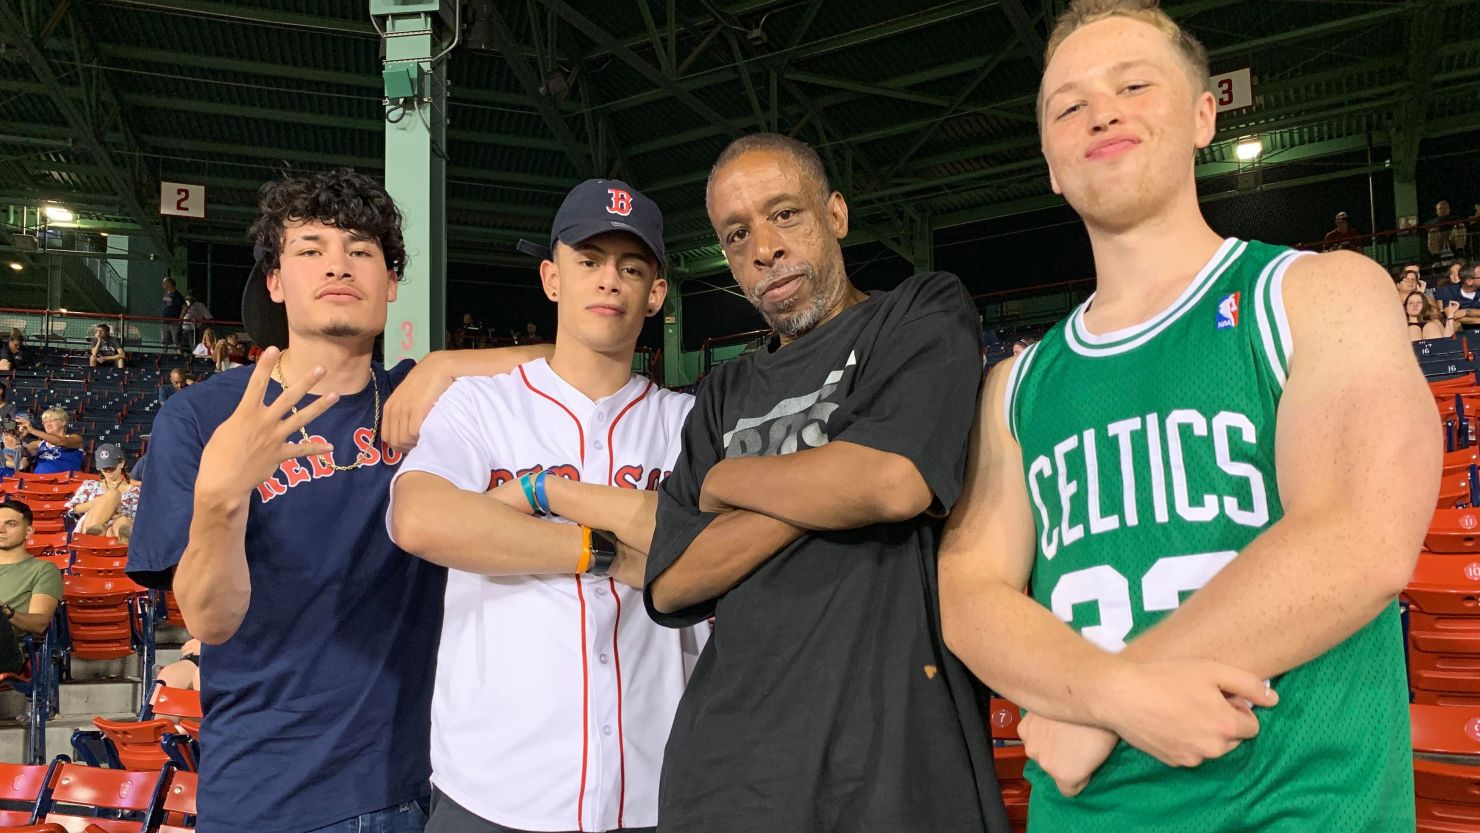 From left: Pedro Lugo, Francisco Rios, John and Sean Wetzonis at the Boston Red Sox game Tuesday.